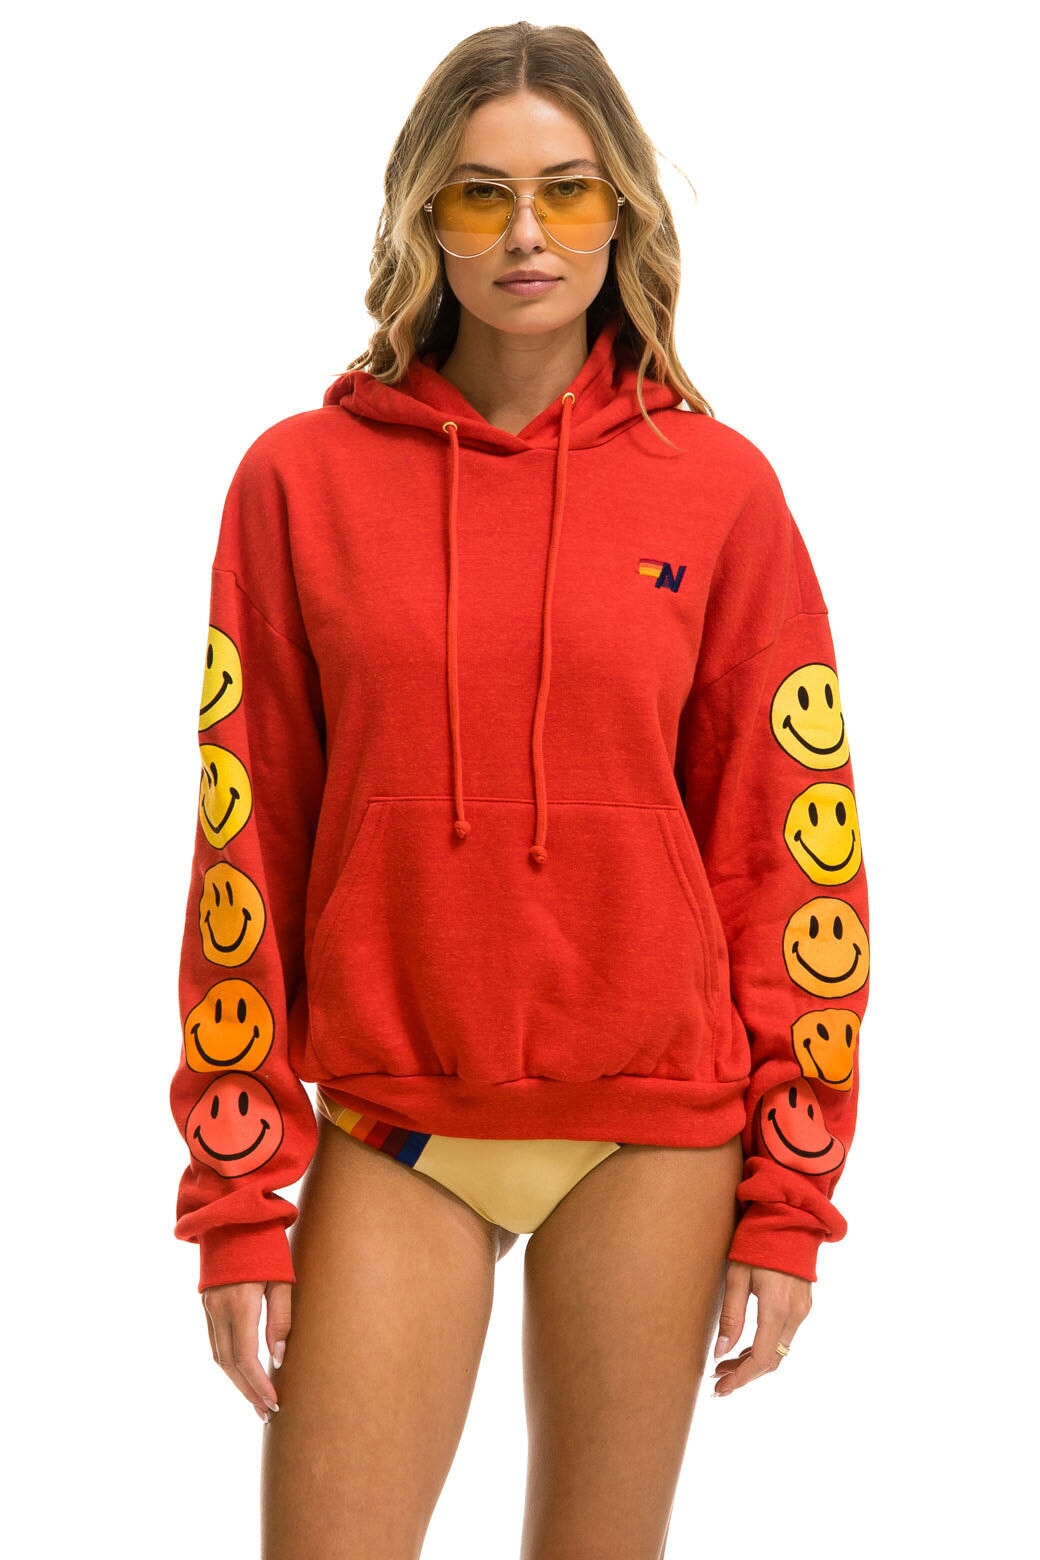 SMILEY SUNSET RELAXED PULLOVER HOODIE - RED Hoodie Aviator Nation 